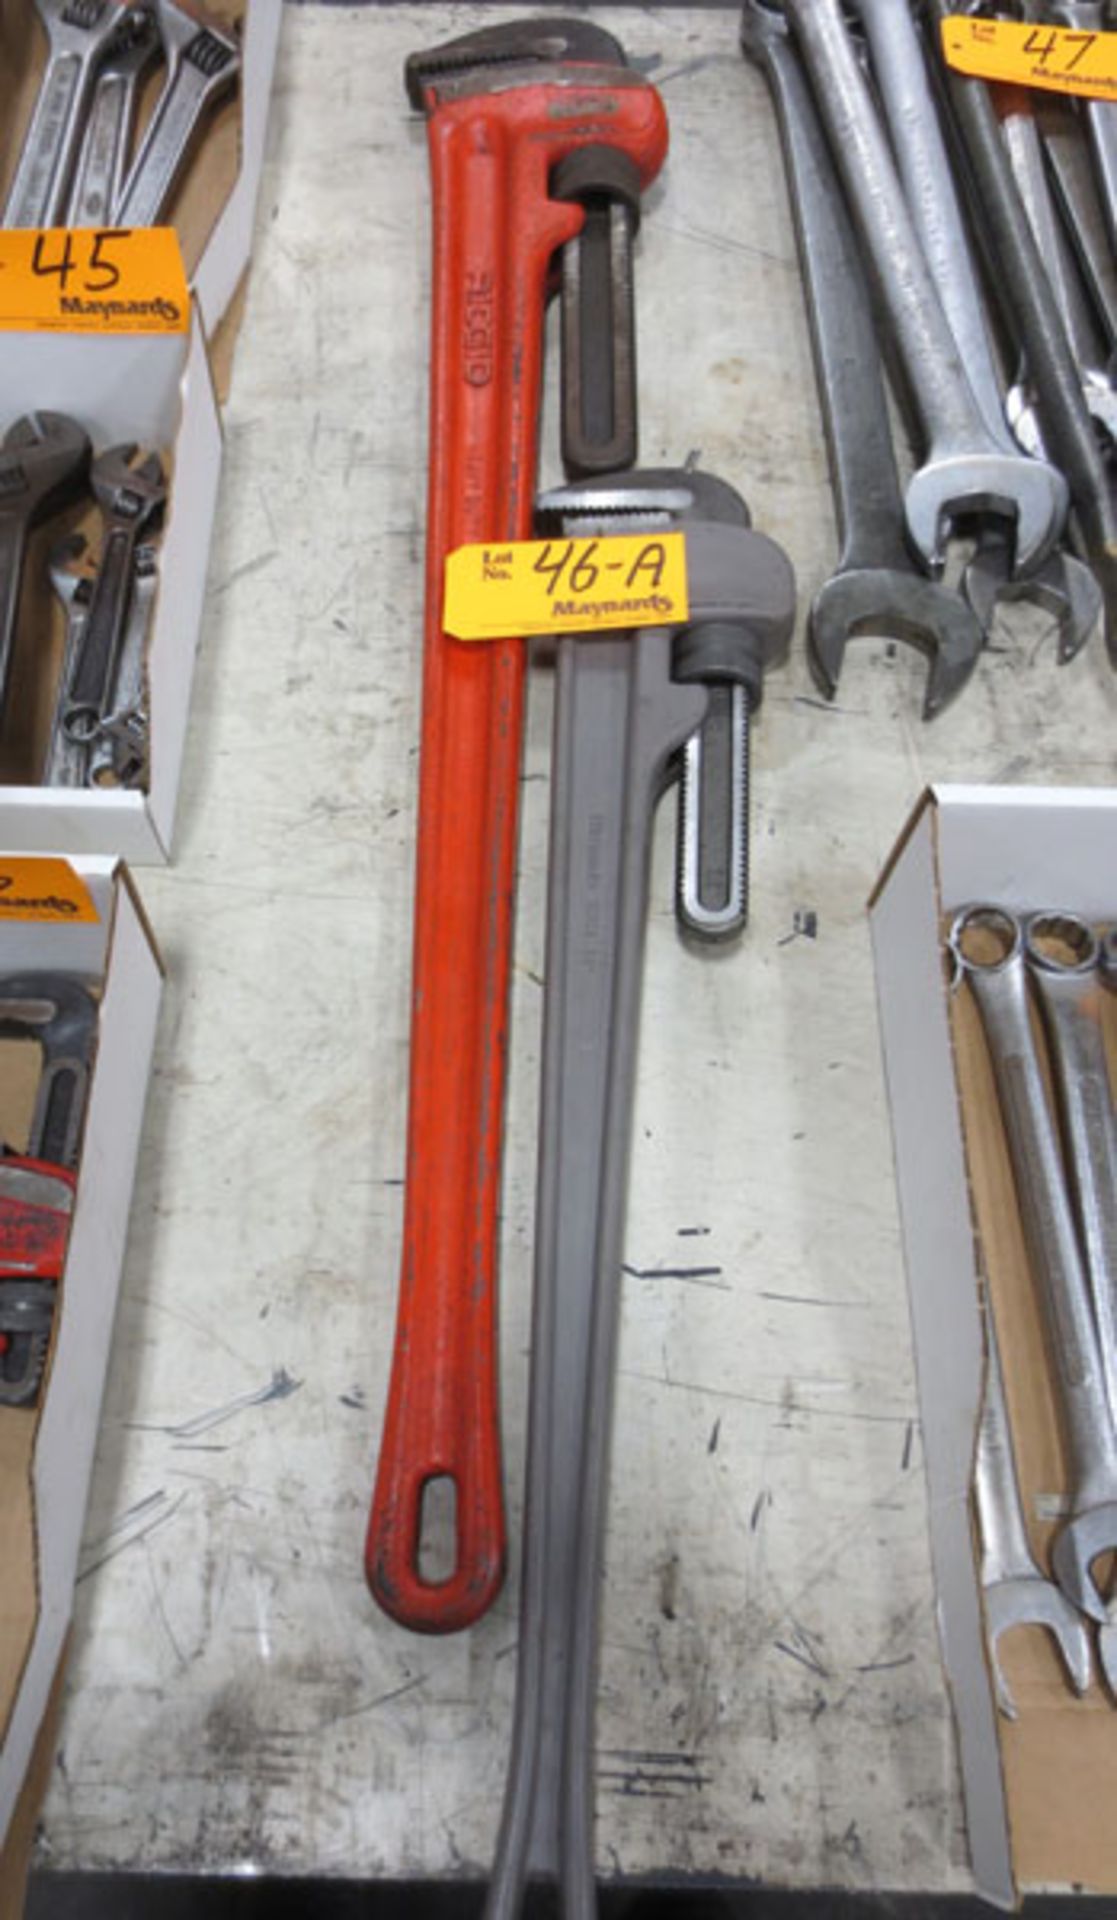 Pipe wrenches (1) Rigid 48”, (1) Westward 36”